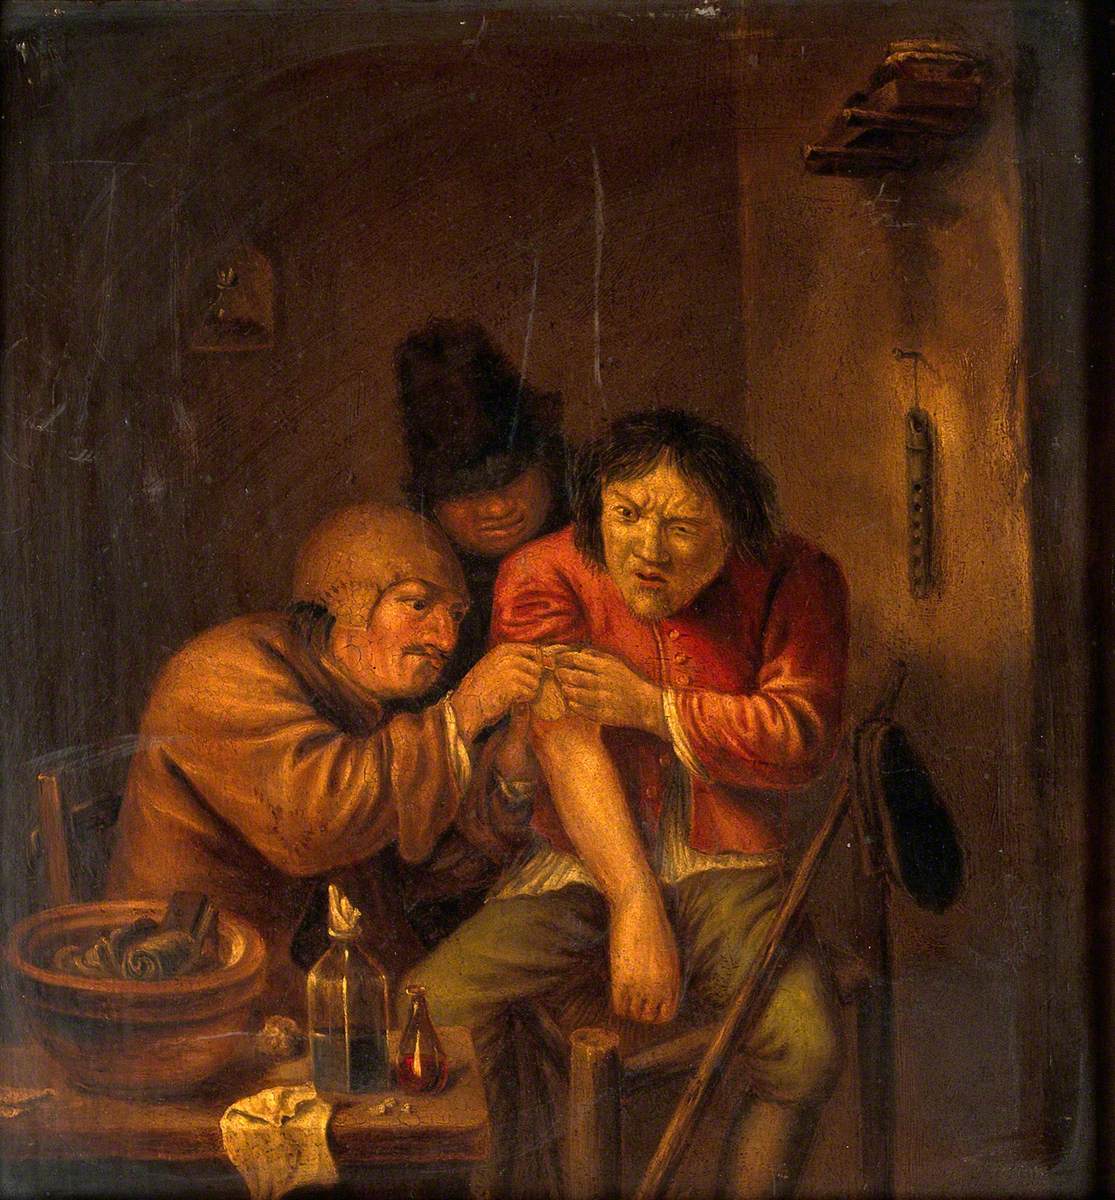 A Surgeon Attending to a Man's Arm